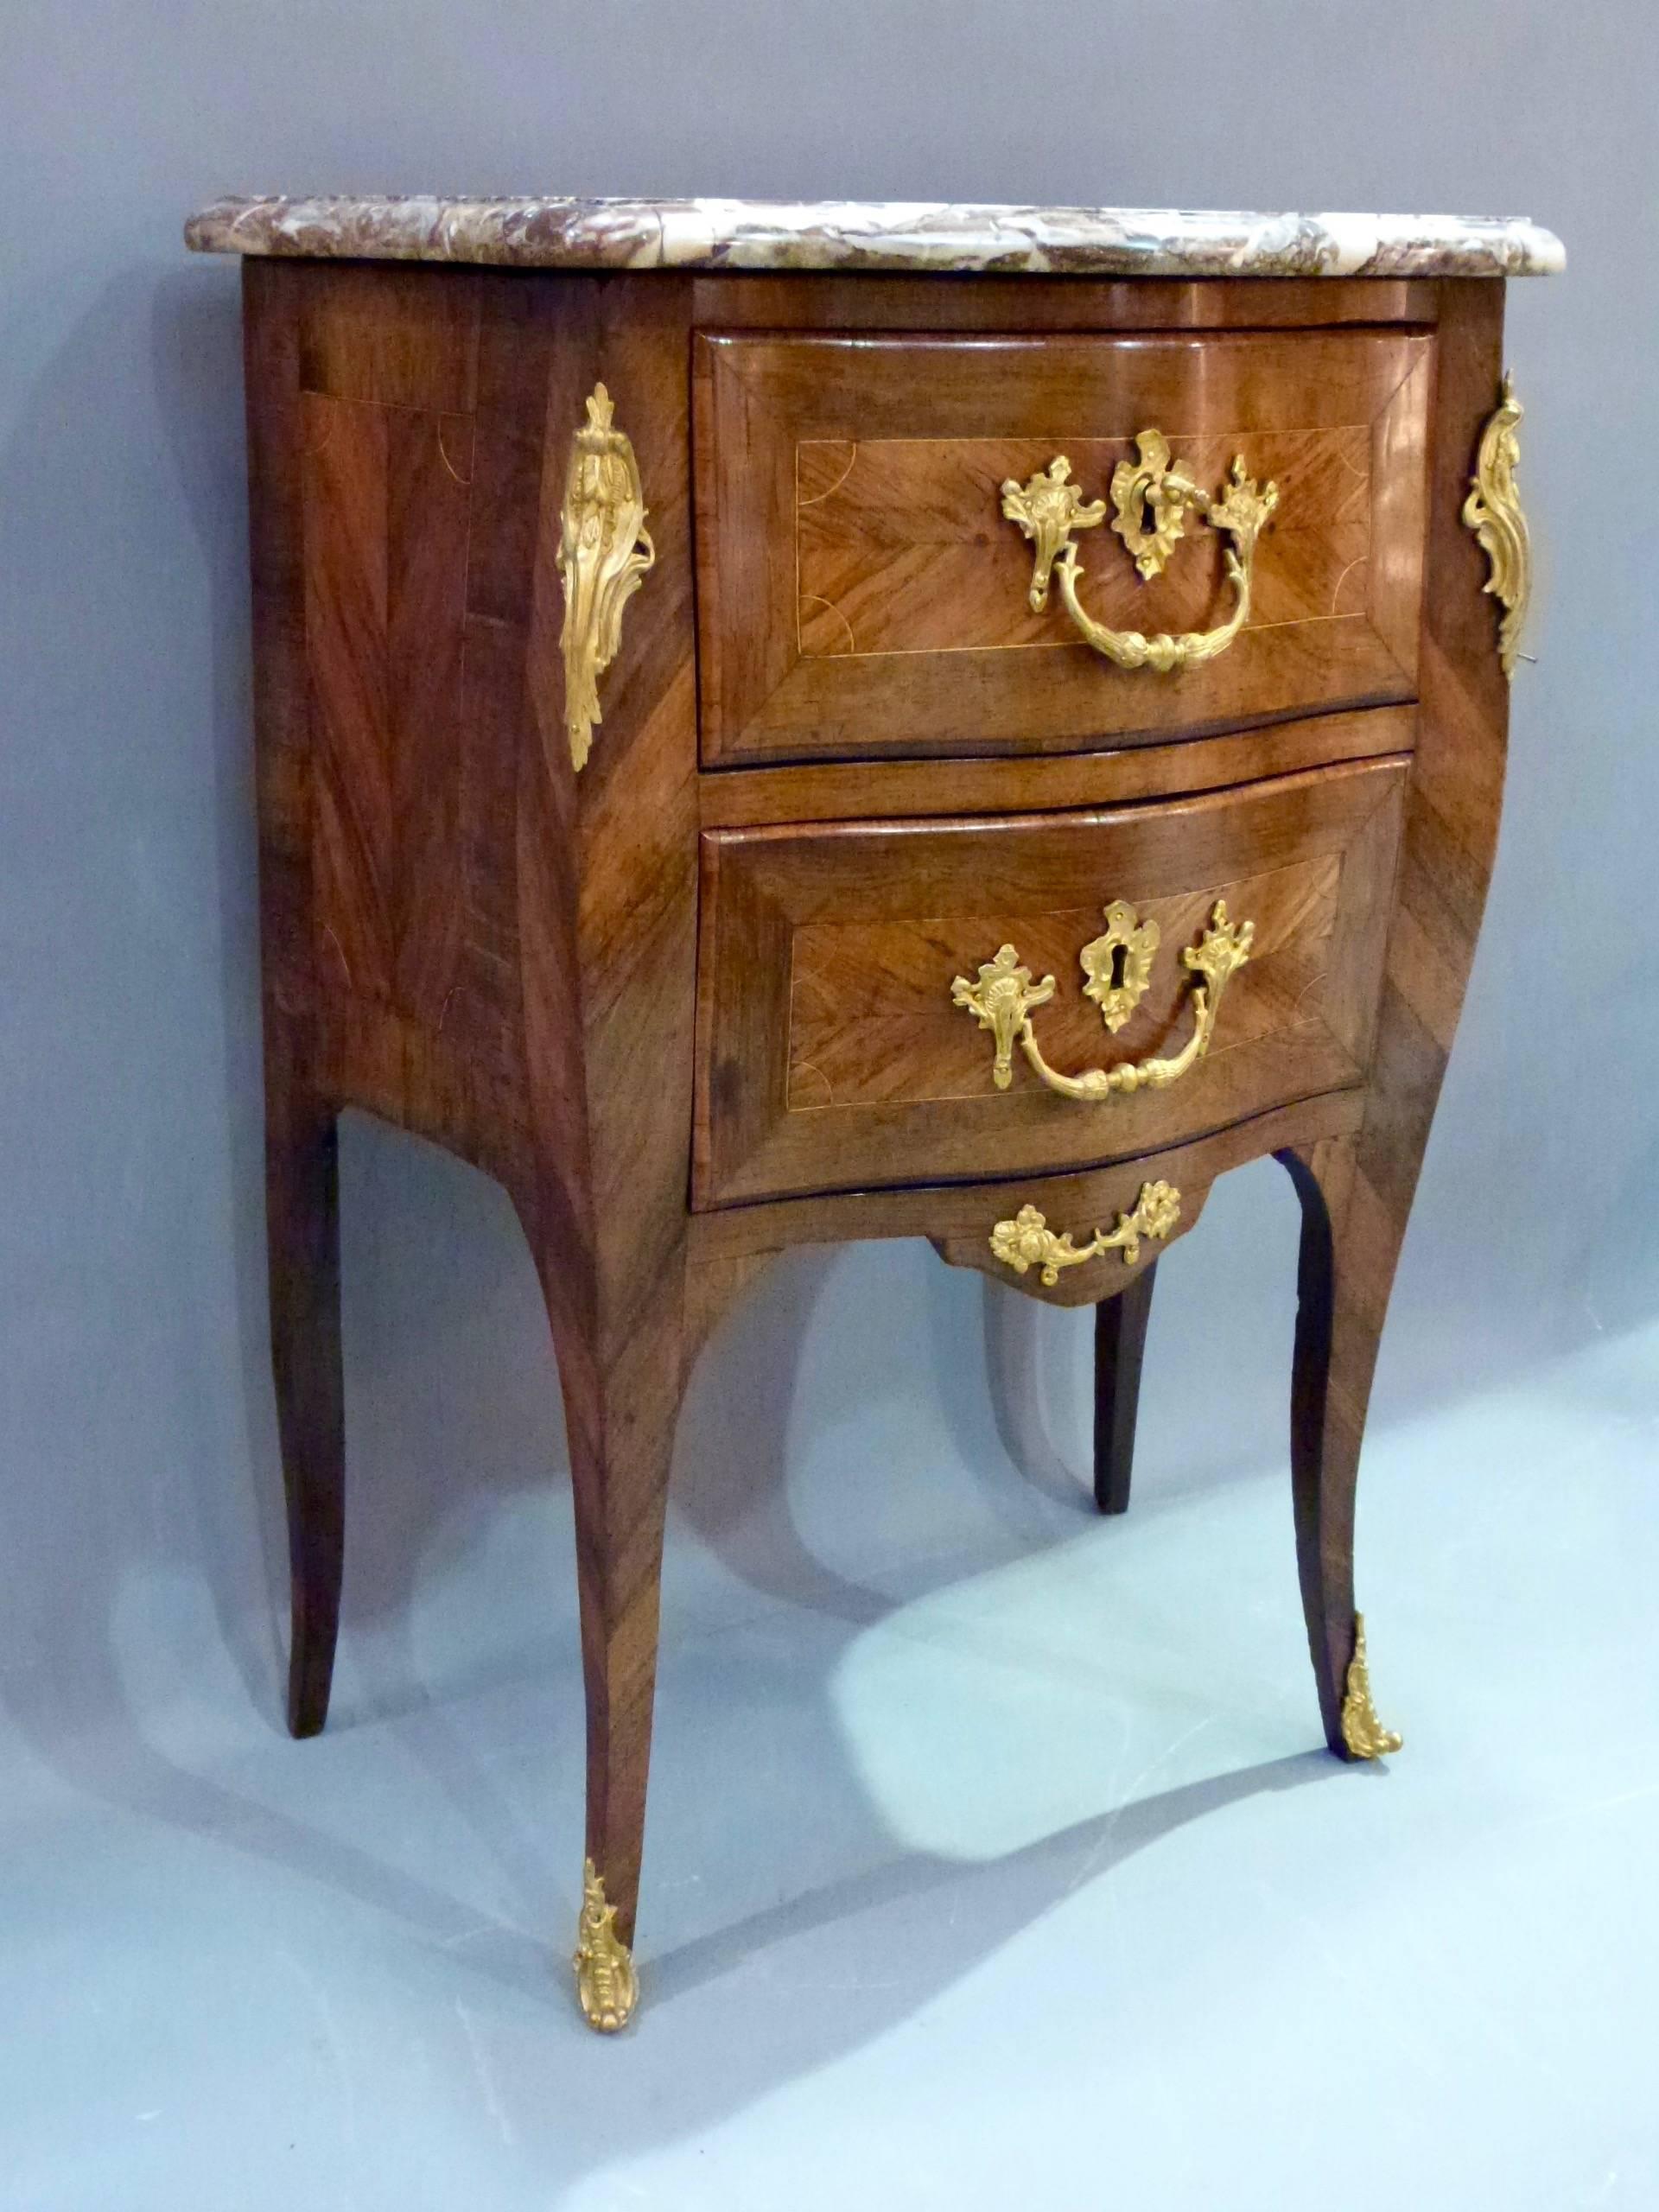 A Louis XV Petit commode by Jean Charles Ellaume. Stamped in two places I C Ellaume JUE. Serpentine form using rosewood and tulipwood. Two drawers with foliate cast gilt bronze mounts. Original key, circa 1760.